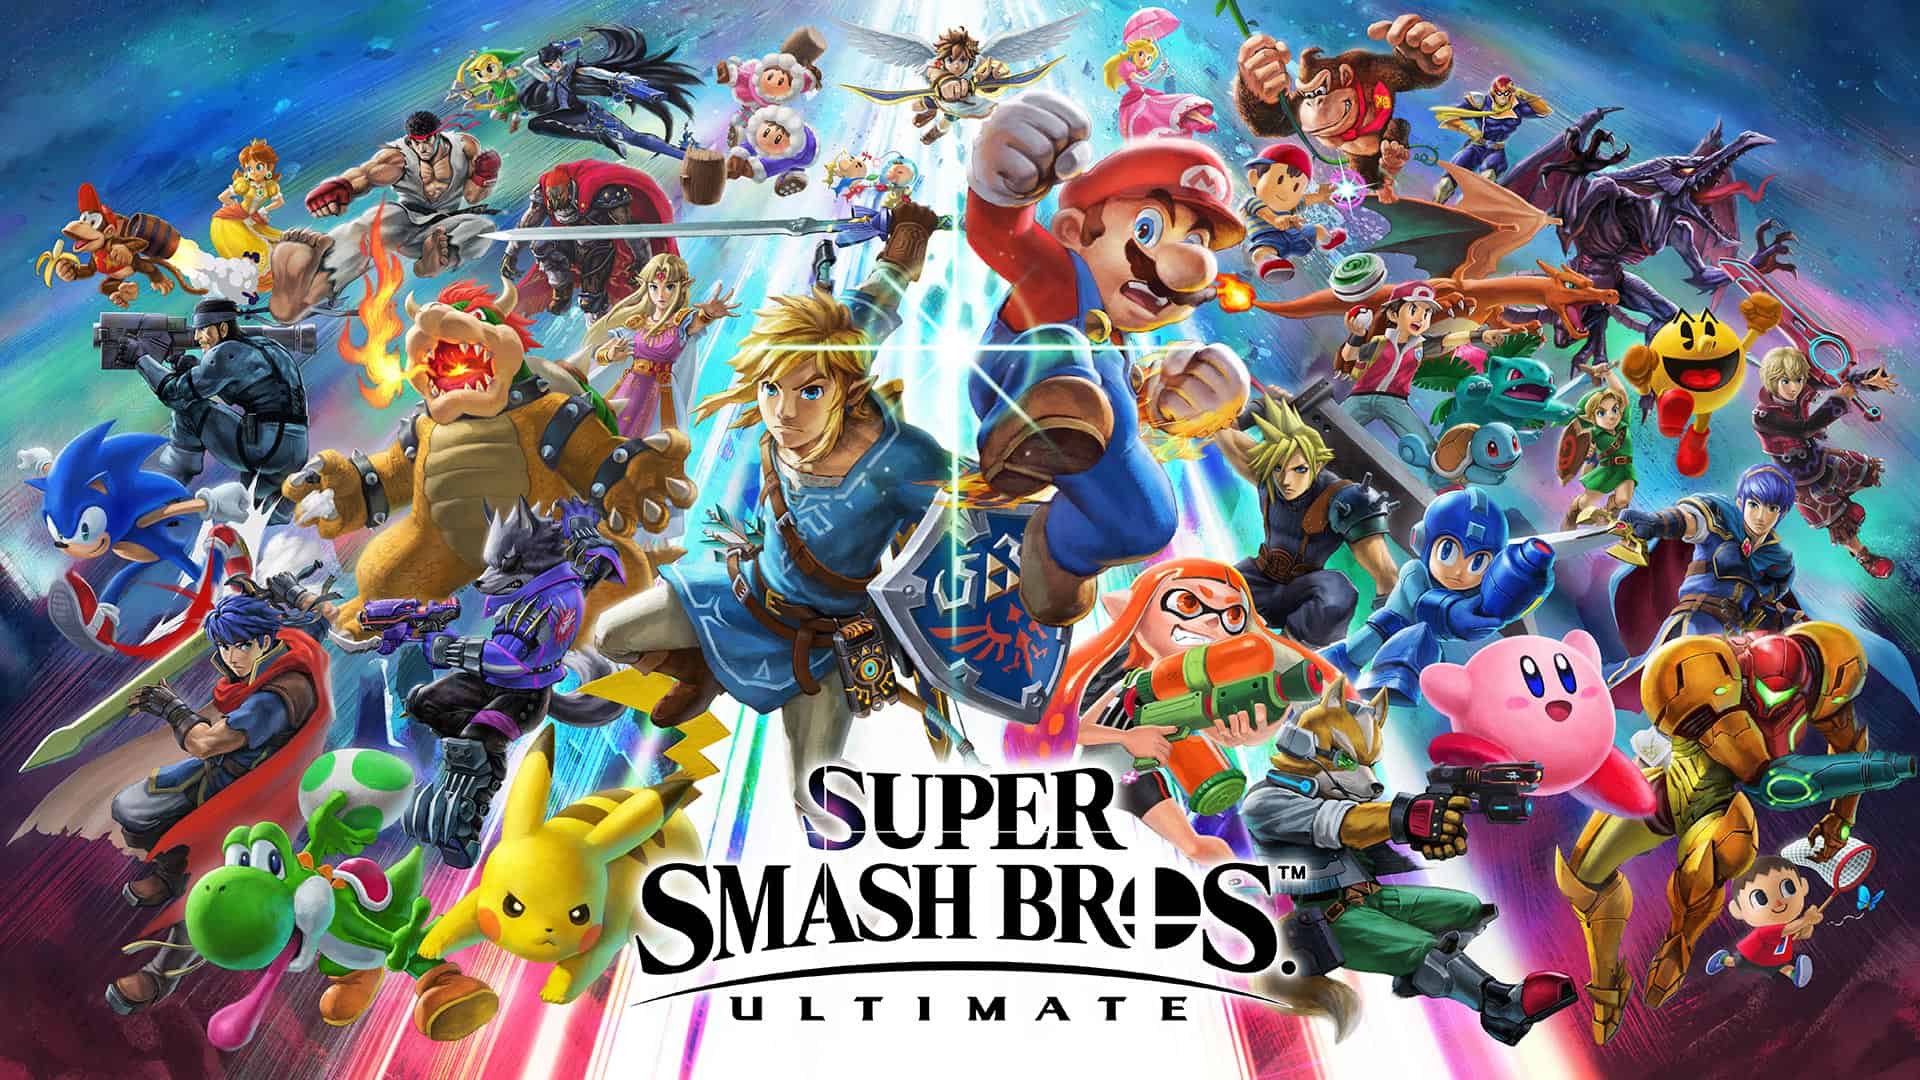 New Details About Super Smash Bros. Ultimate DLC Fighter Hero From The Dragon Quest Series To Be Revealed Tomorrow